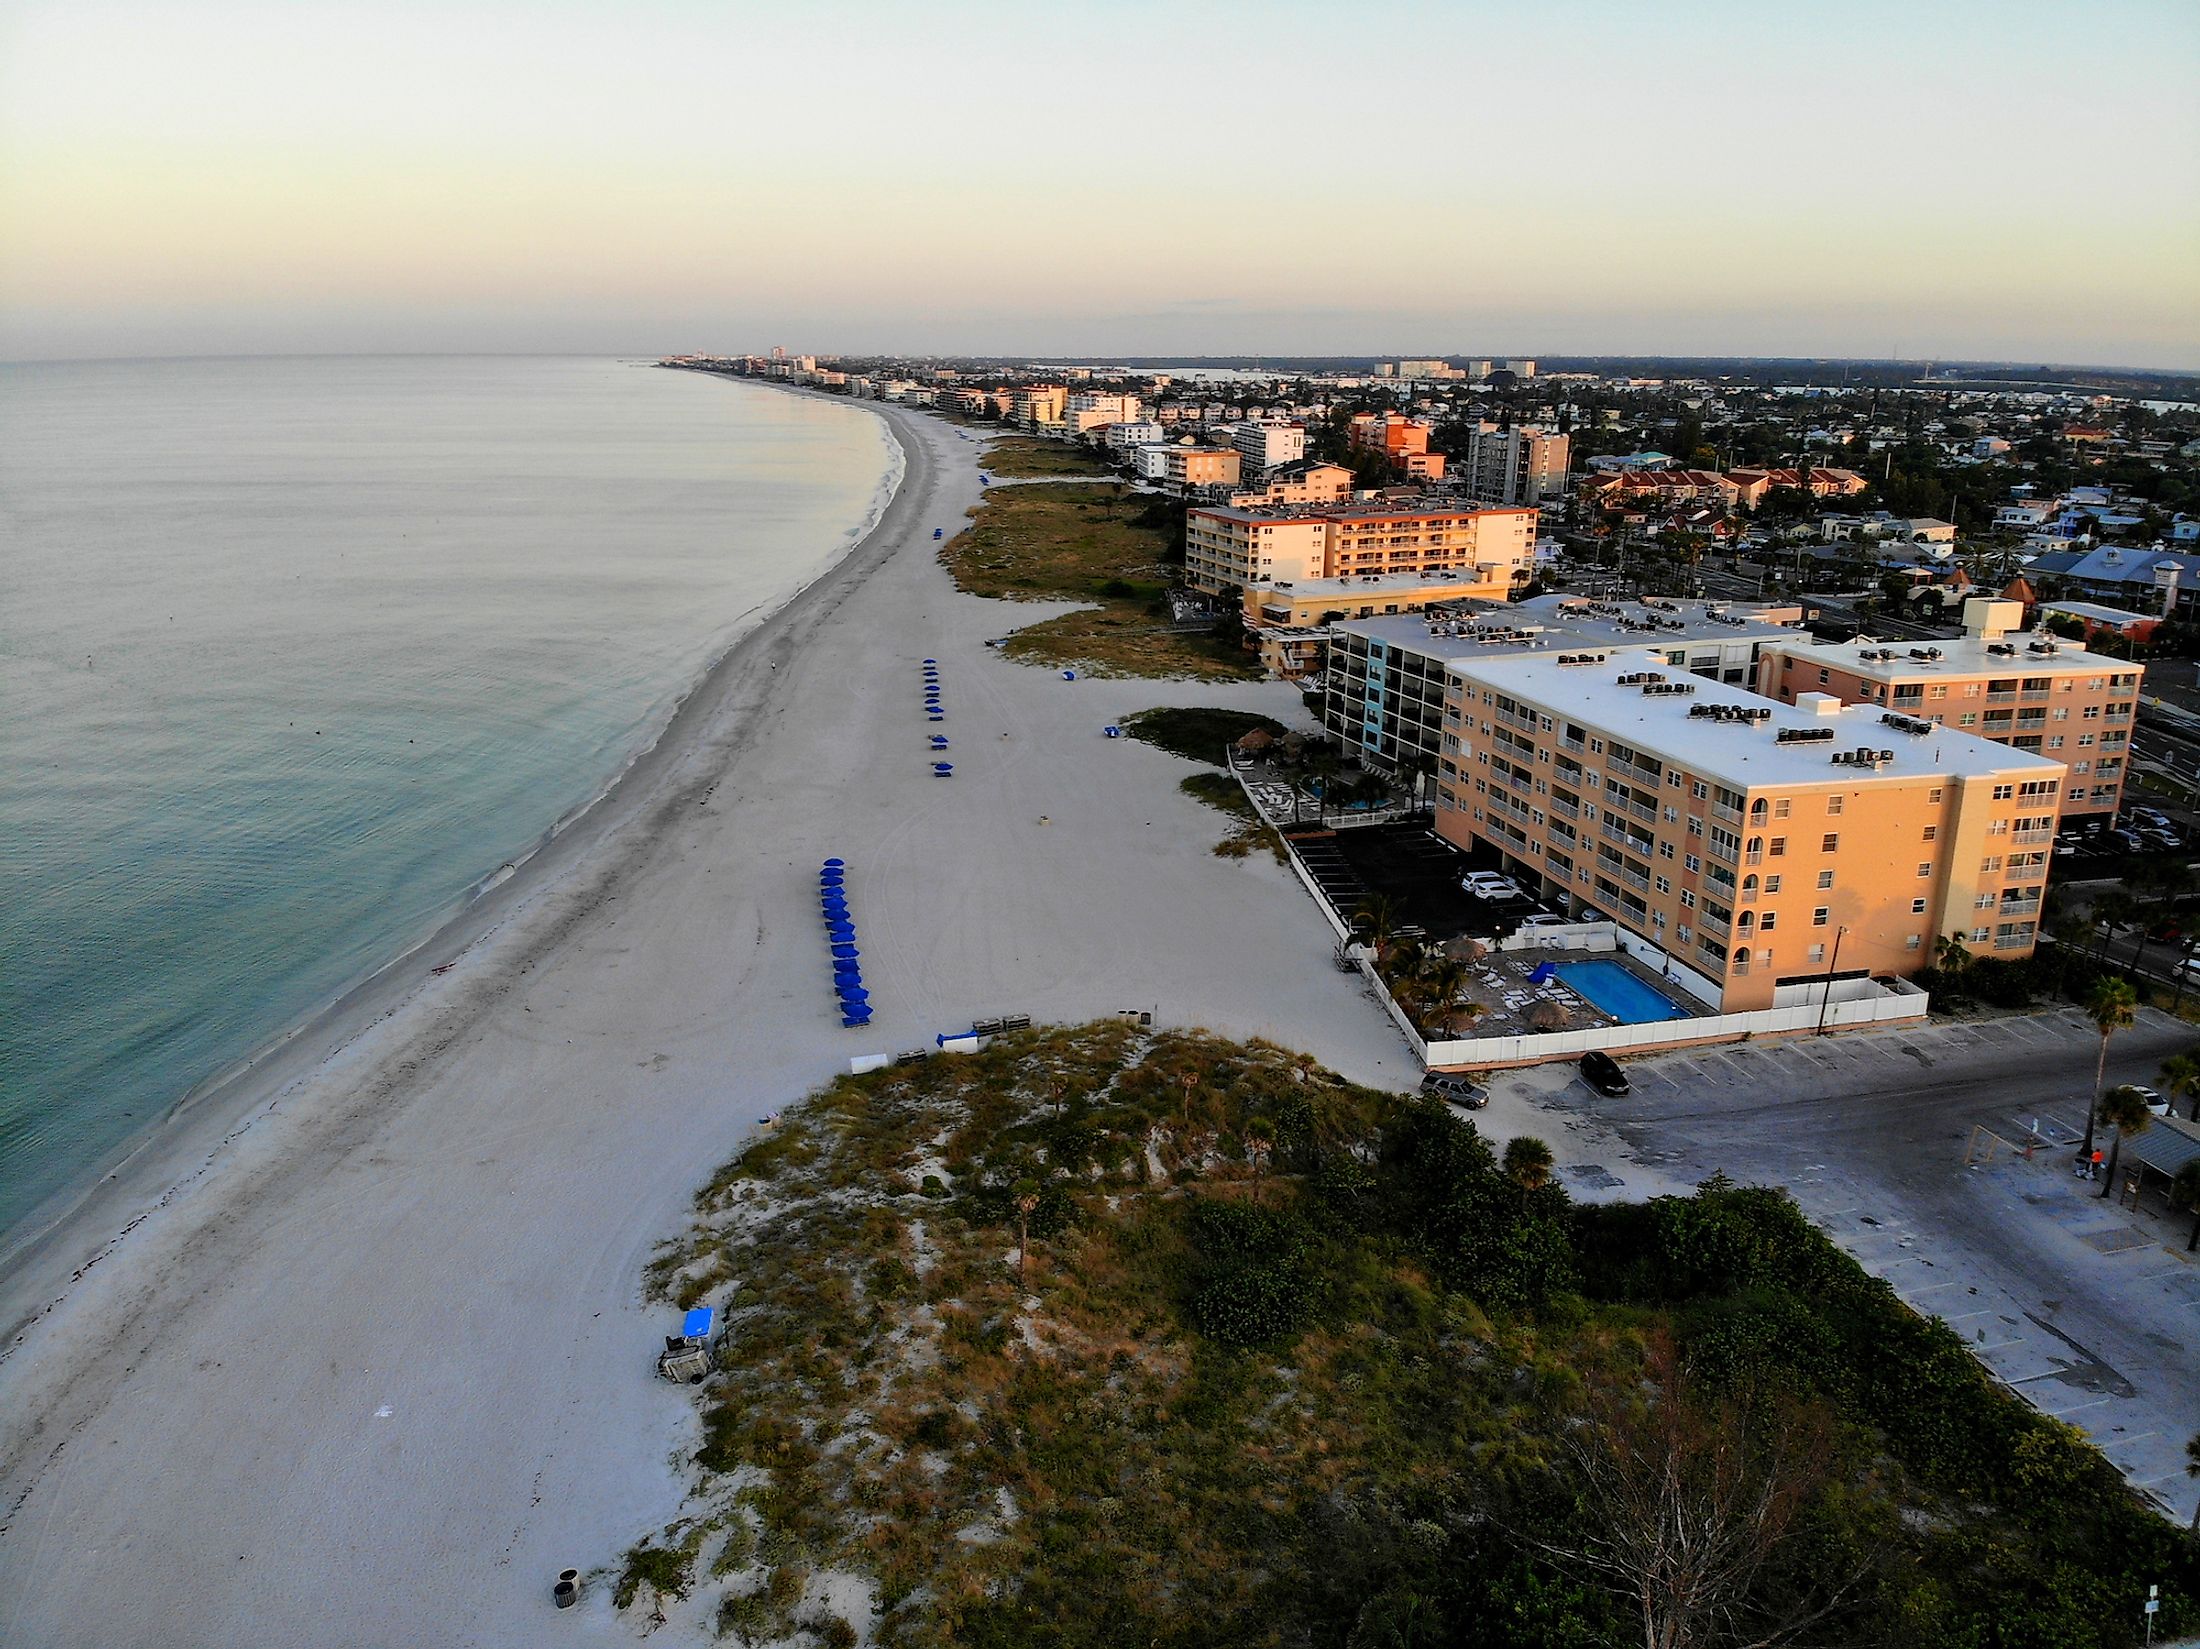 The aerial view of the beach and waterfront resorts hotel at Madeira Beach. Editorial credit: Khairil Azhar Junos / Shutterstock.com